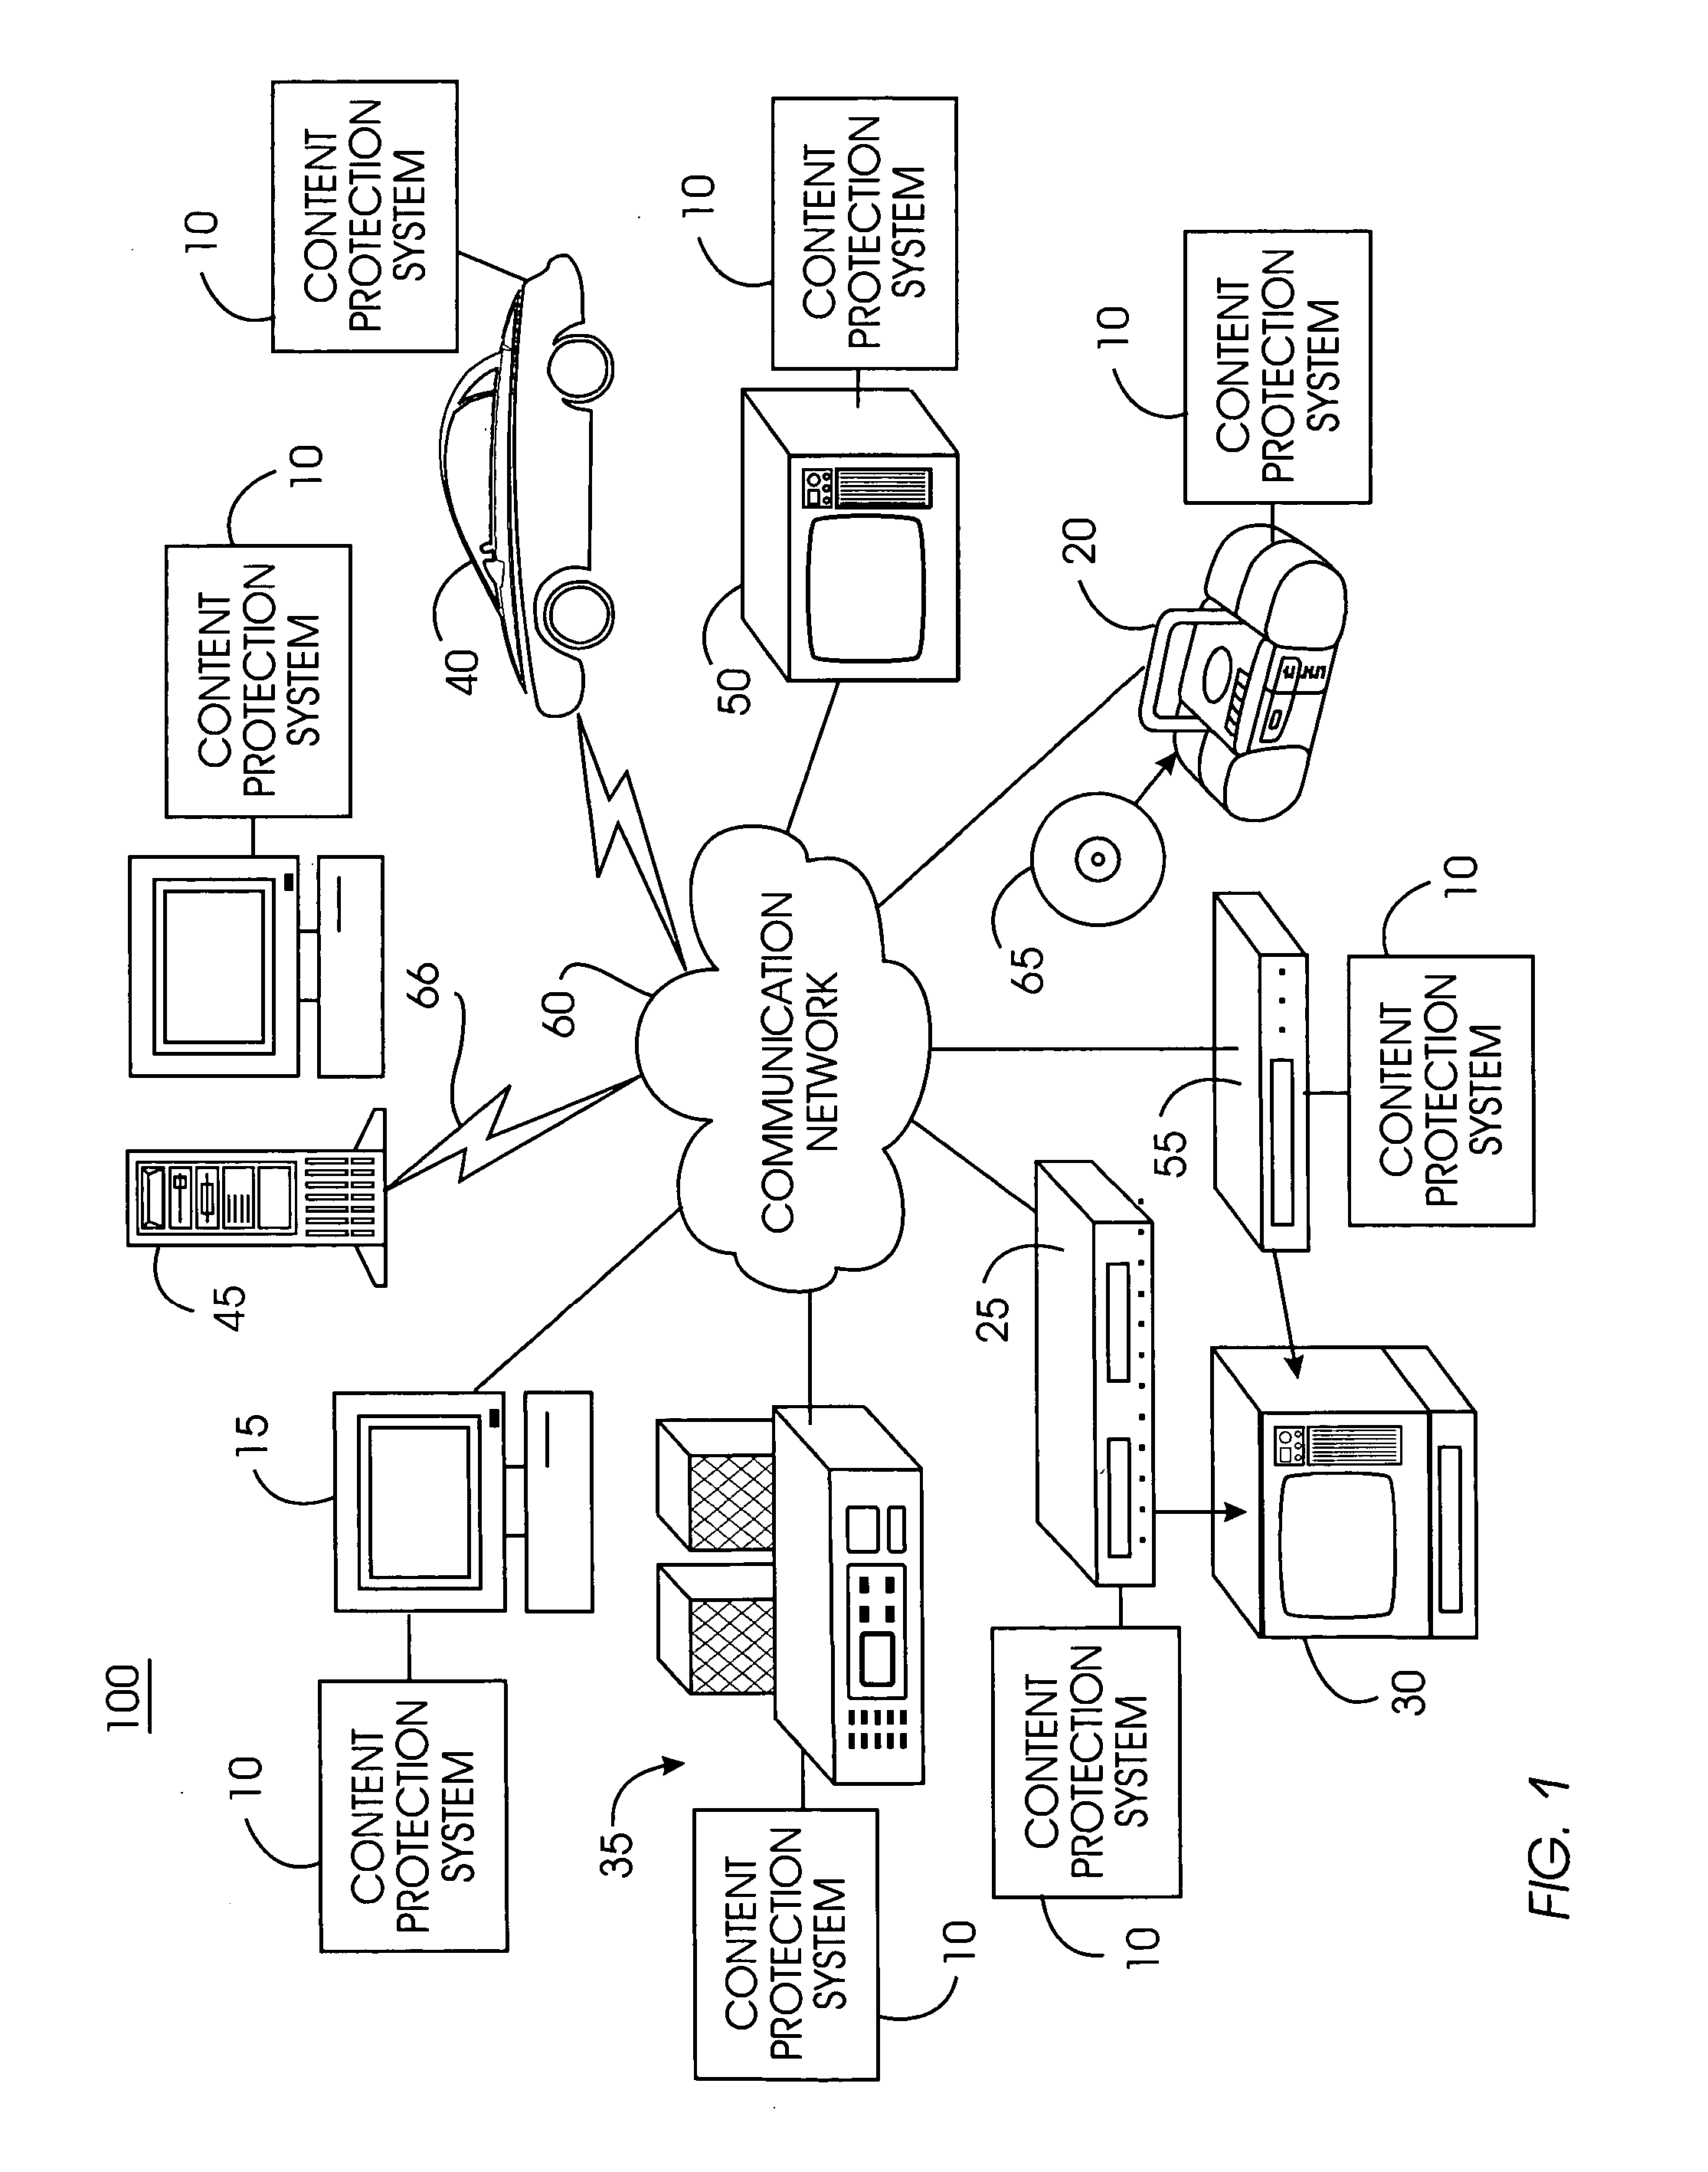 System and method for securely removing content or a device from a content-protected home network